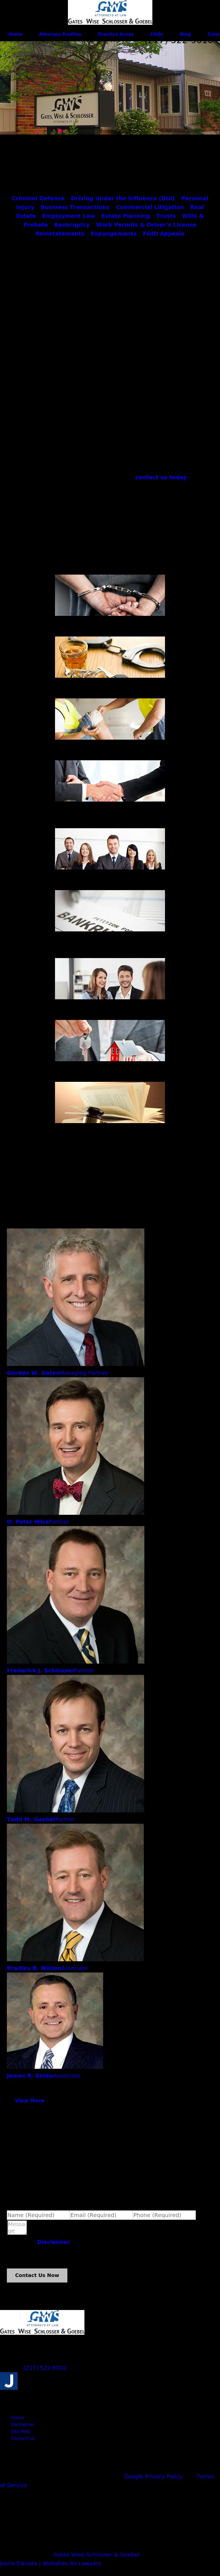 Gates, Wise & Schlosser, PC - Springfield IL Lawyers